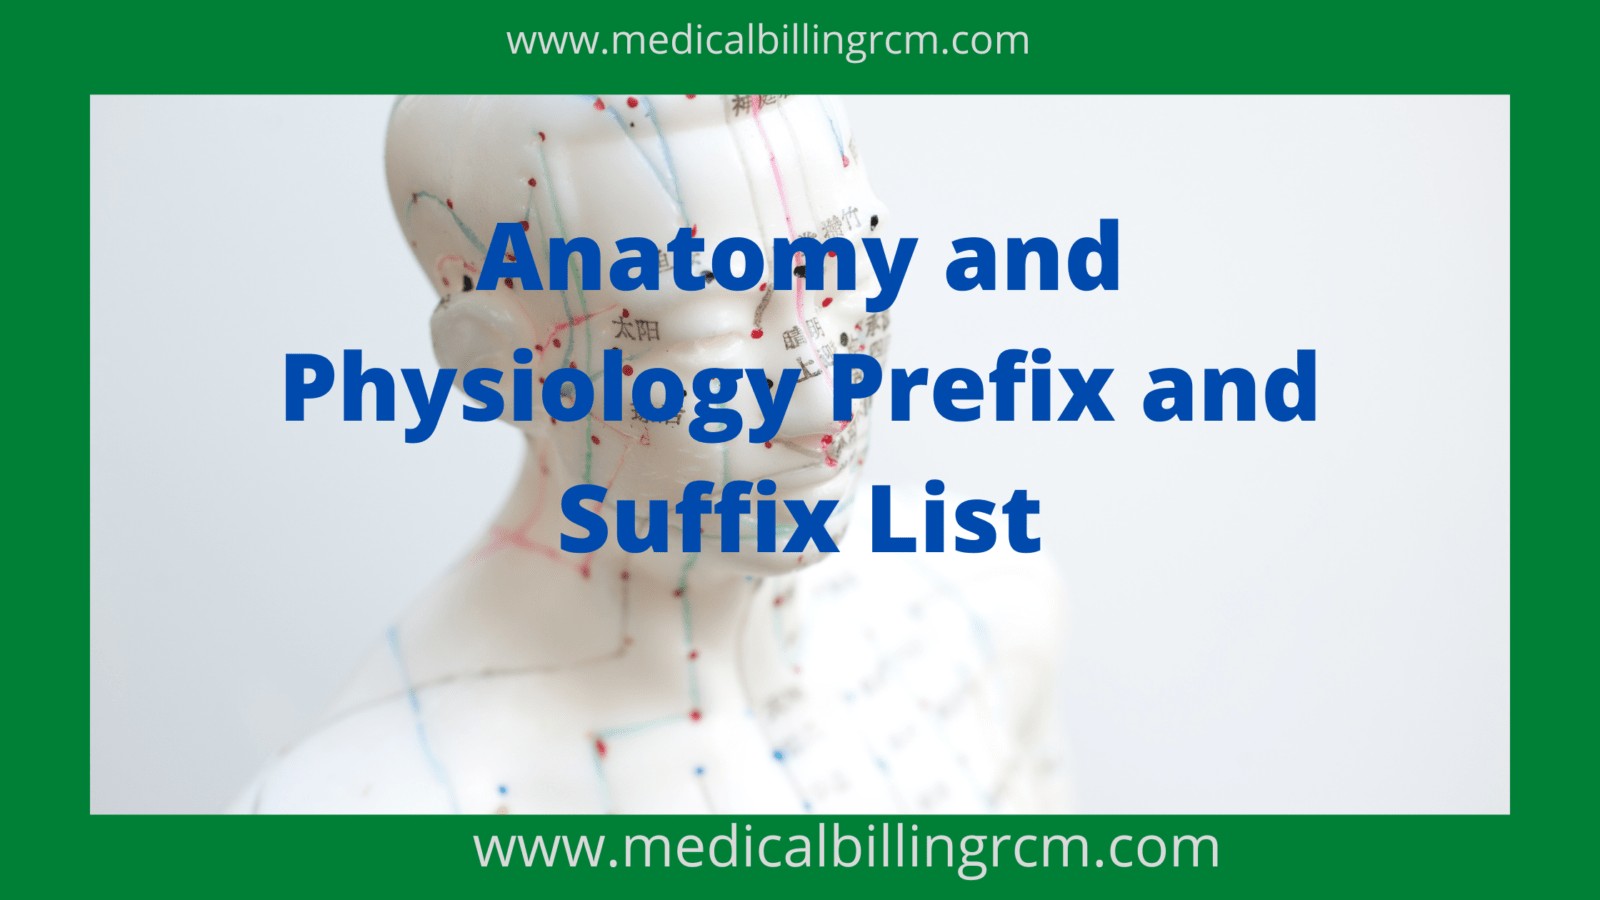 Anatomy and Physiology Prefixes and Suffixes